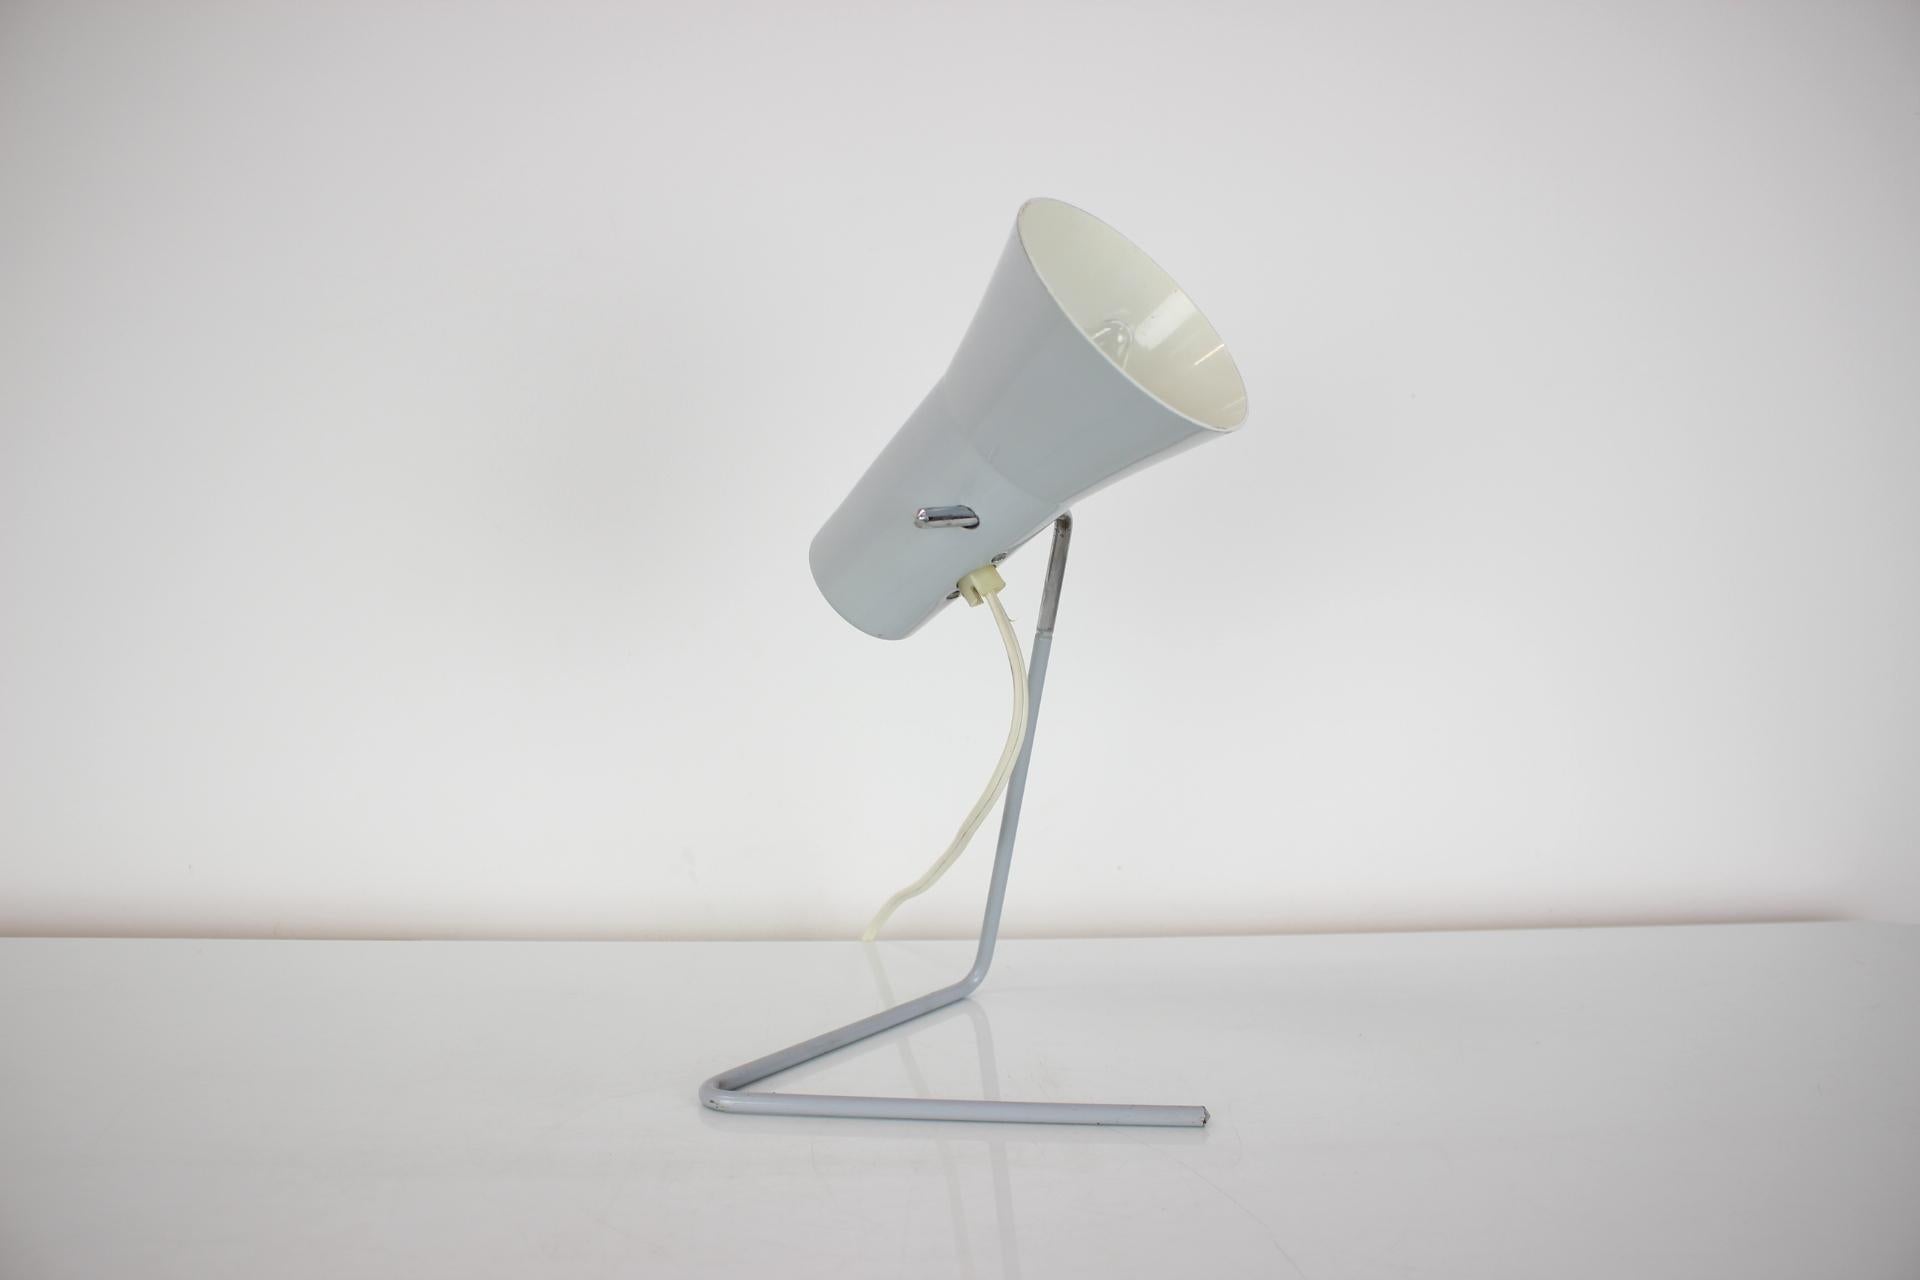 Czech Table Lamp with Adjustable Shade by Hurka for Drupol Praha, 1960s For Sale